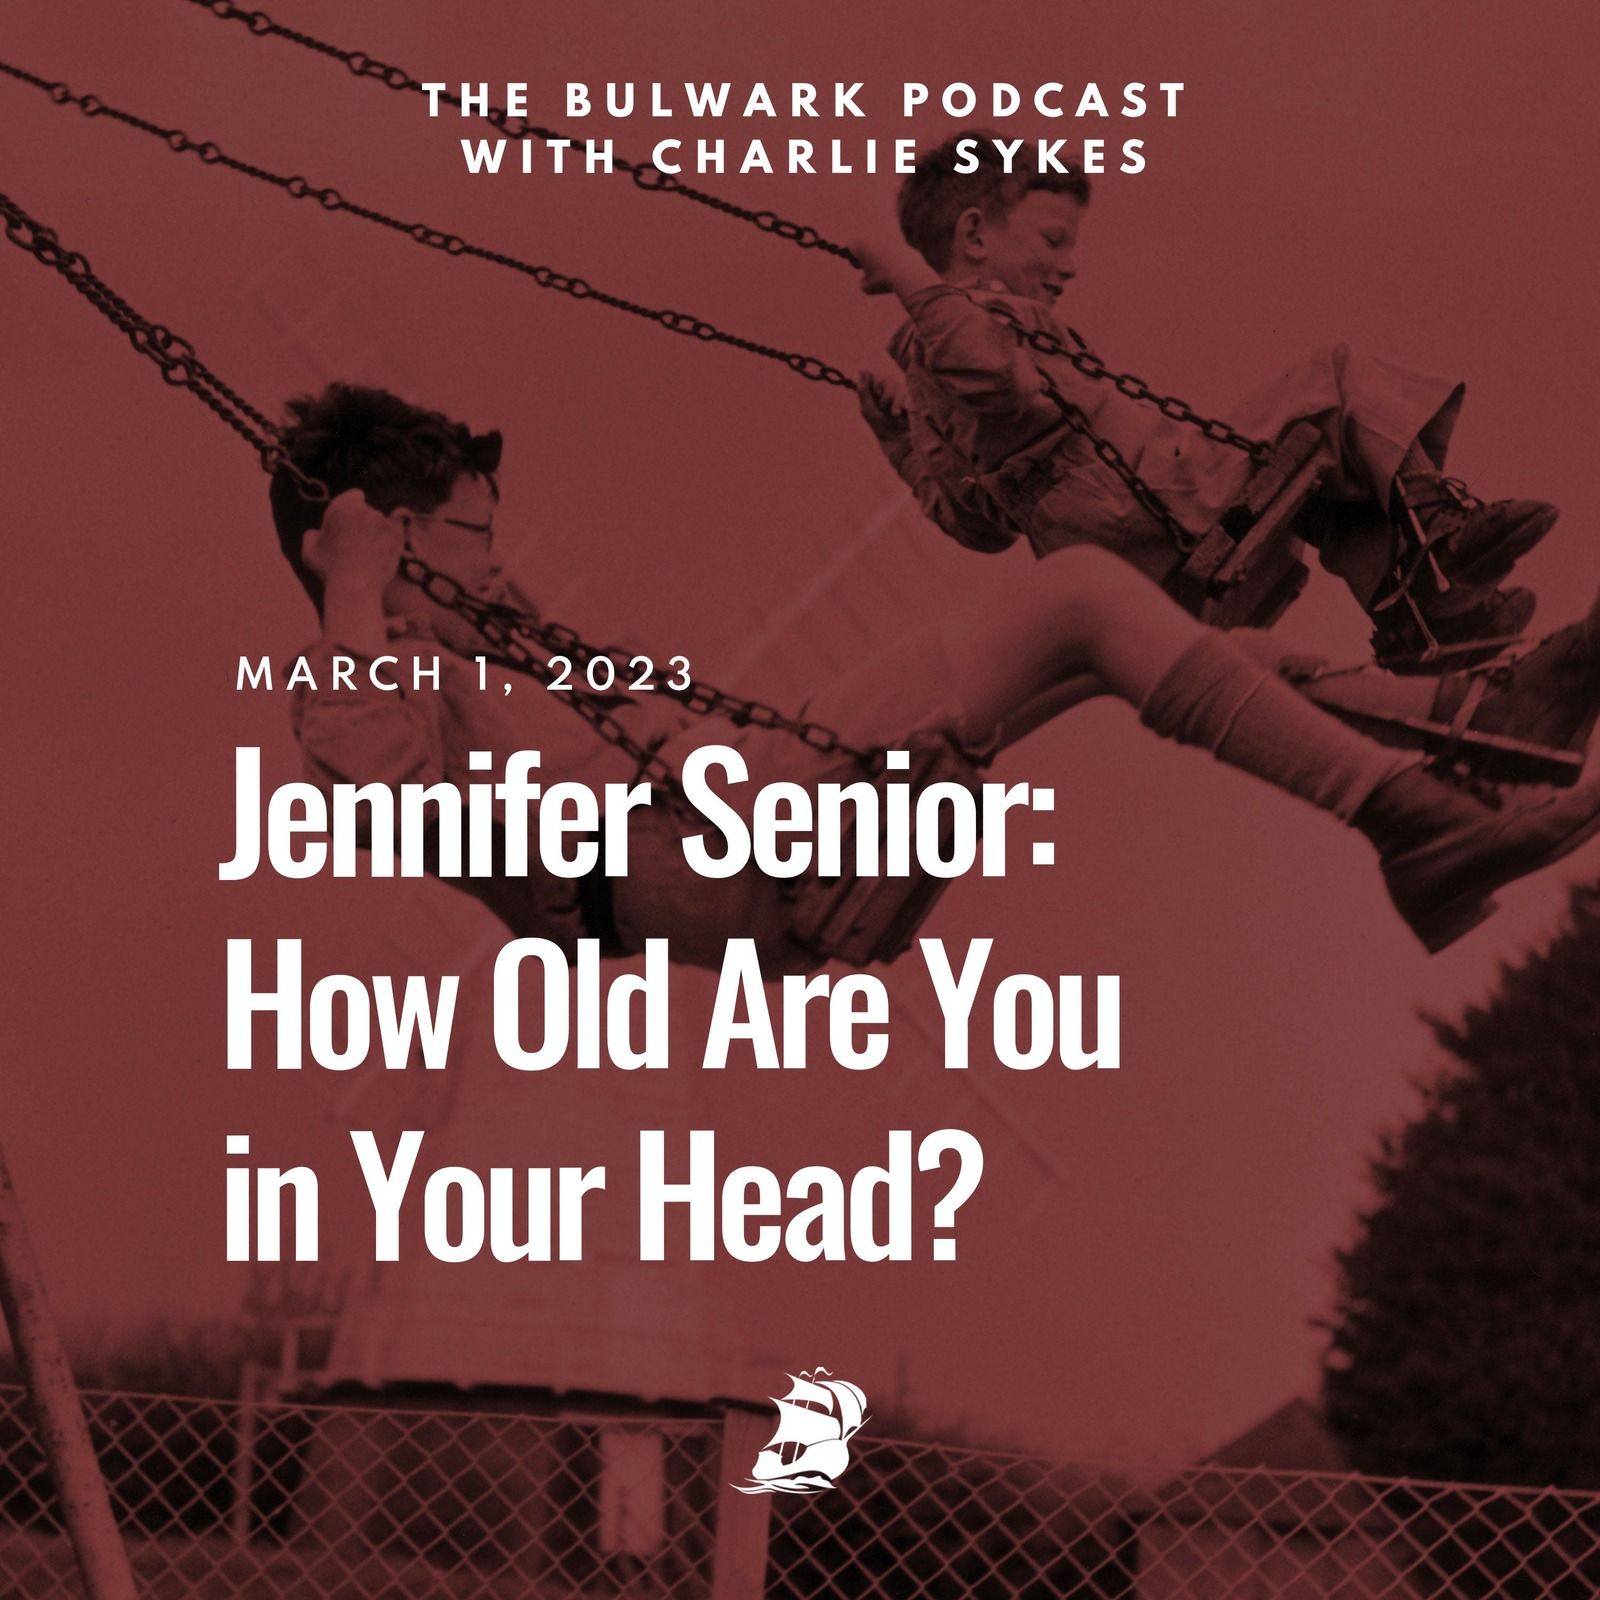 Jennifer Senior: How Old Are You in Your Head?